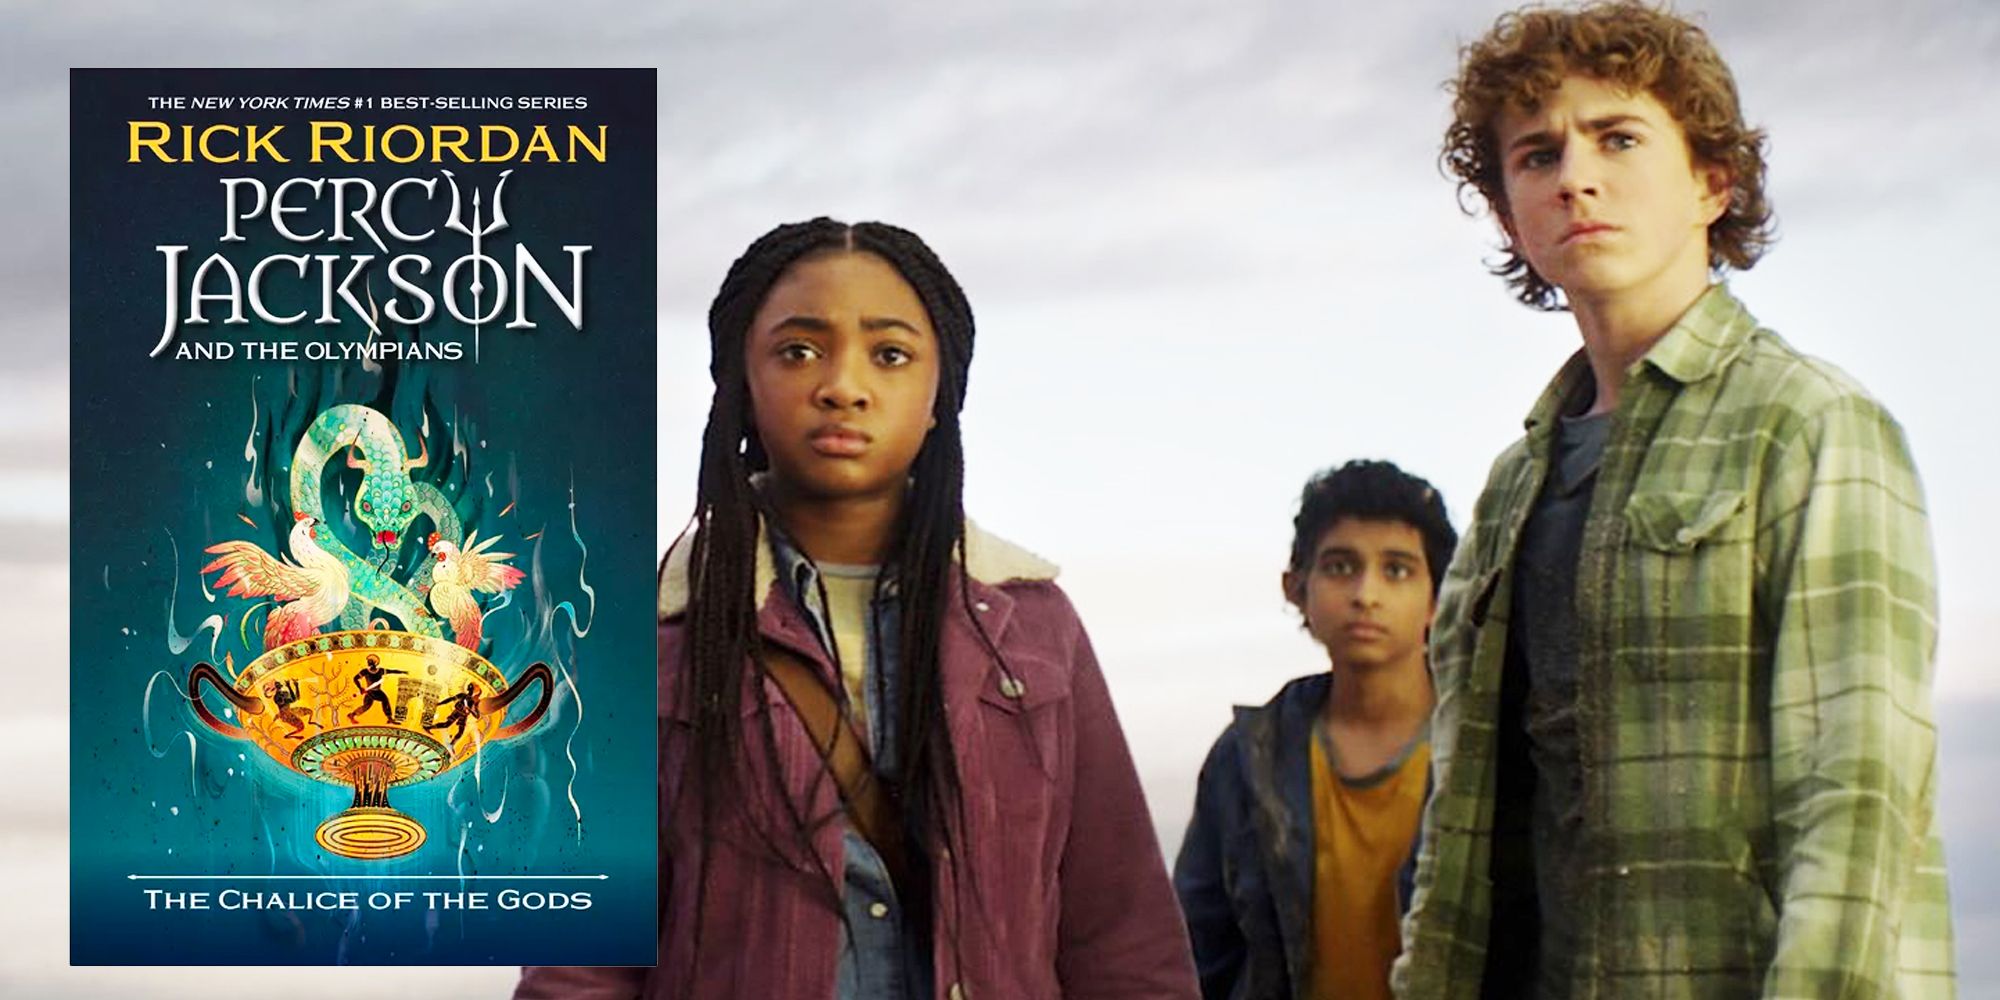 Percy Jackson and the Olympians Author Promises TV Adaptation Will Fix the  Film's Mistakes - TV Guide